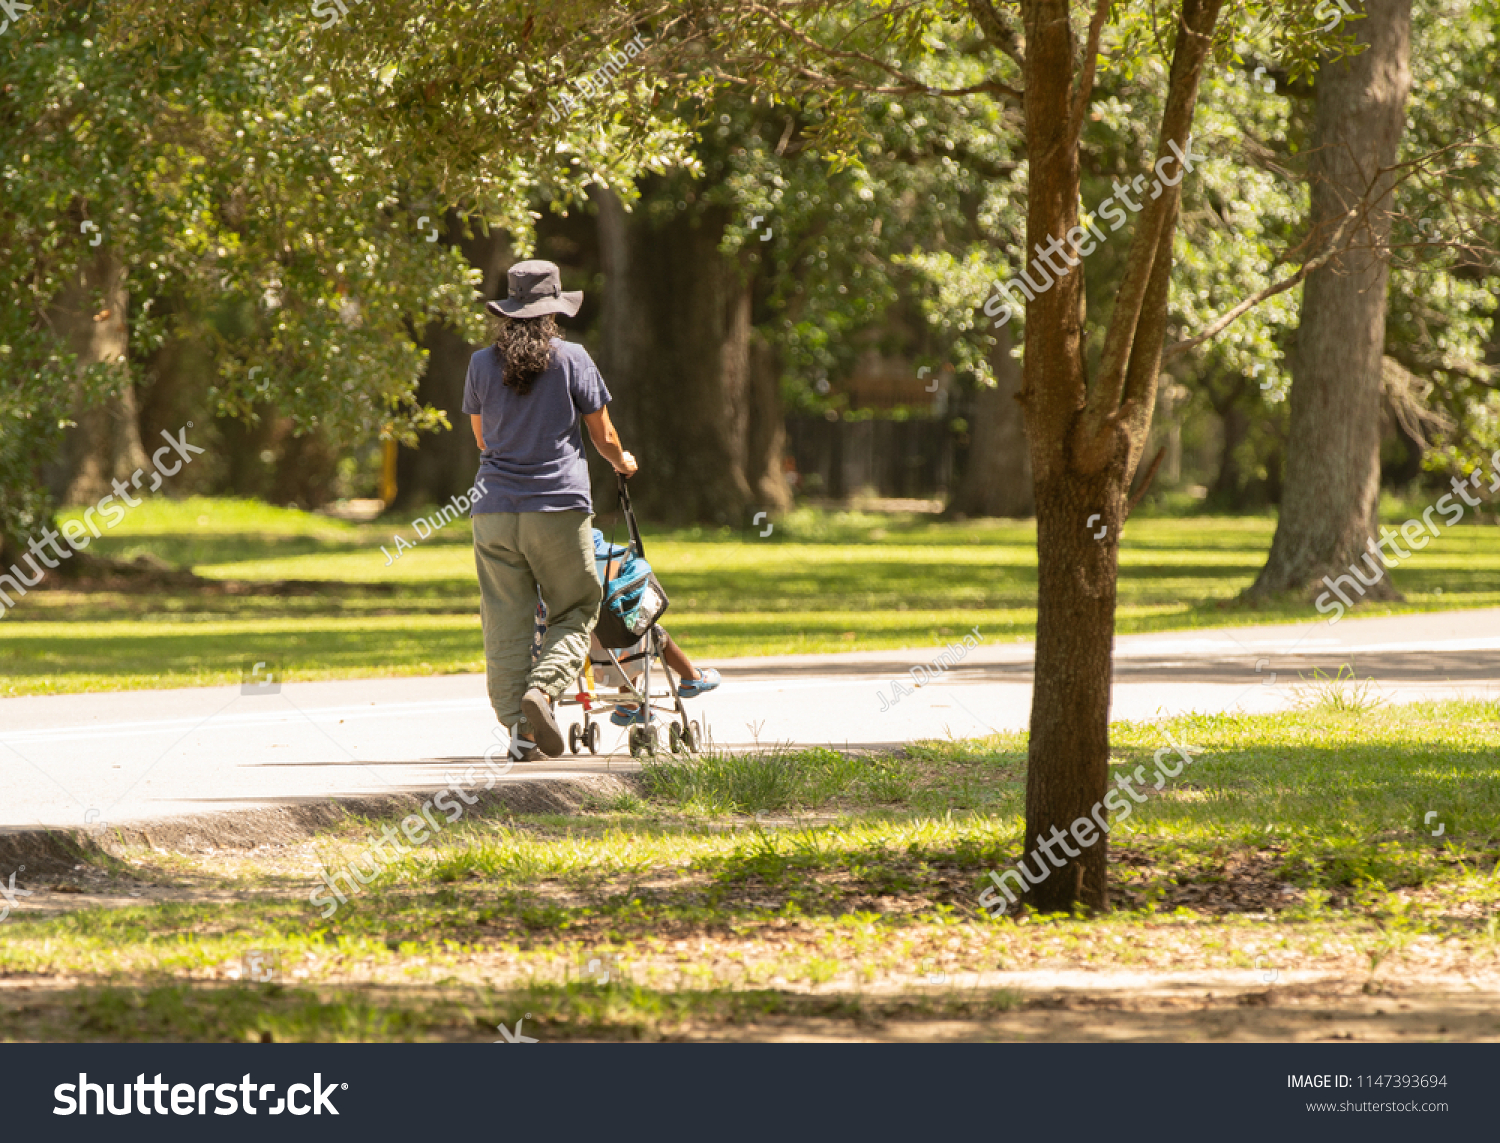 unknown woman with stroller takes her son for a picnic in the park #1147393694